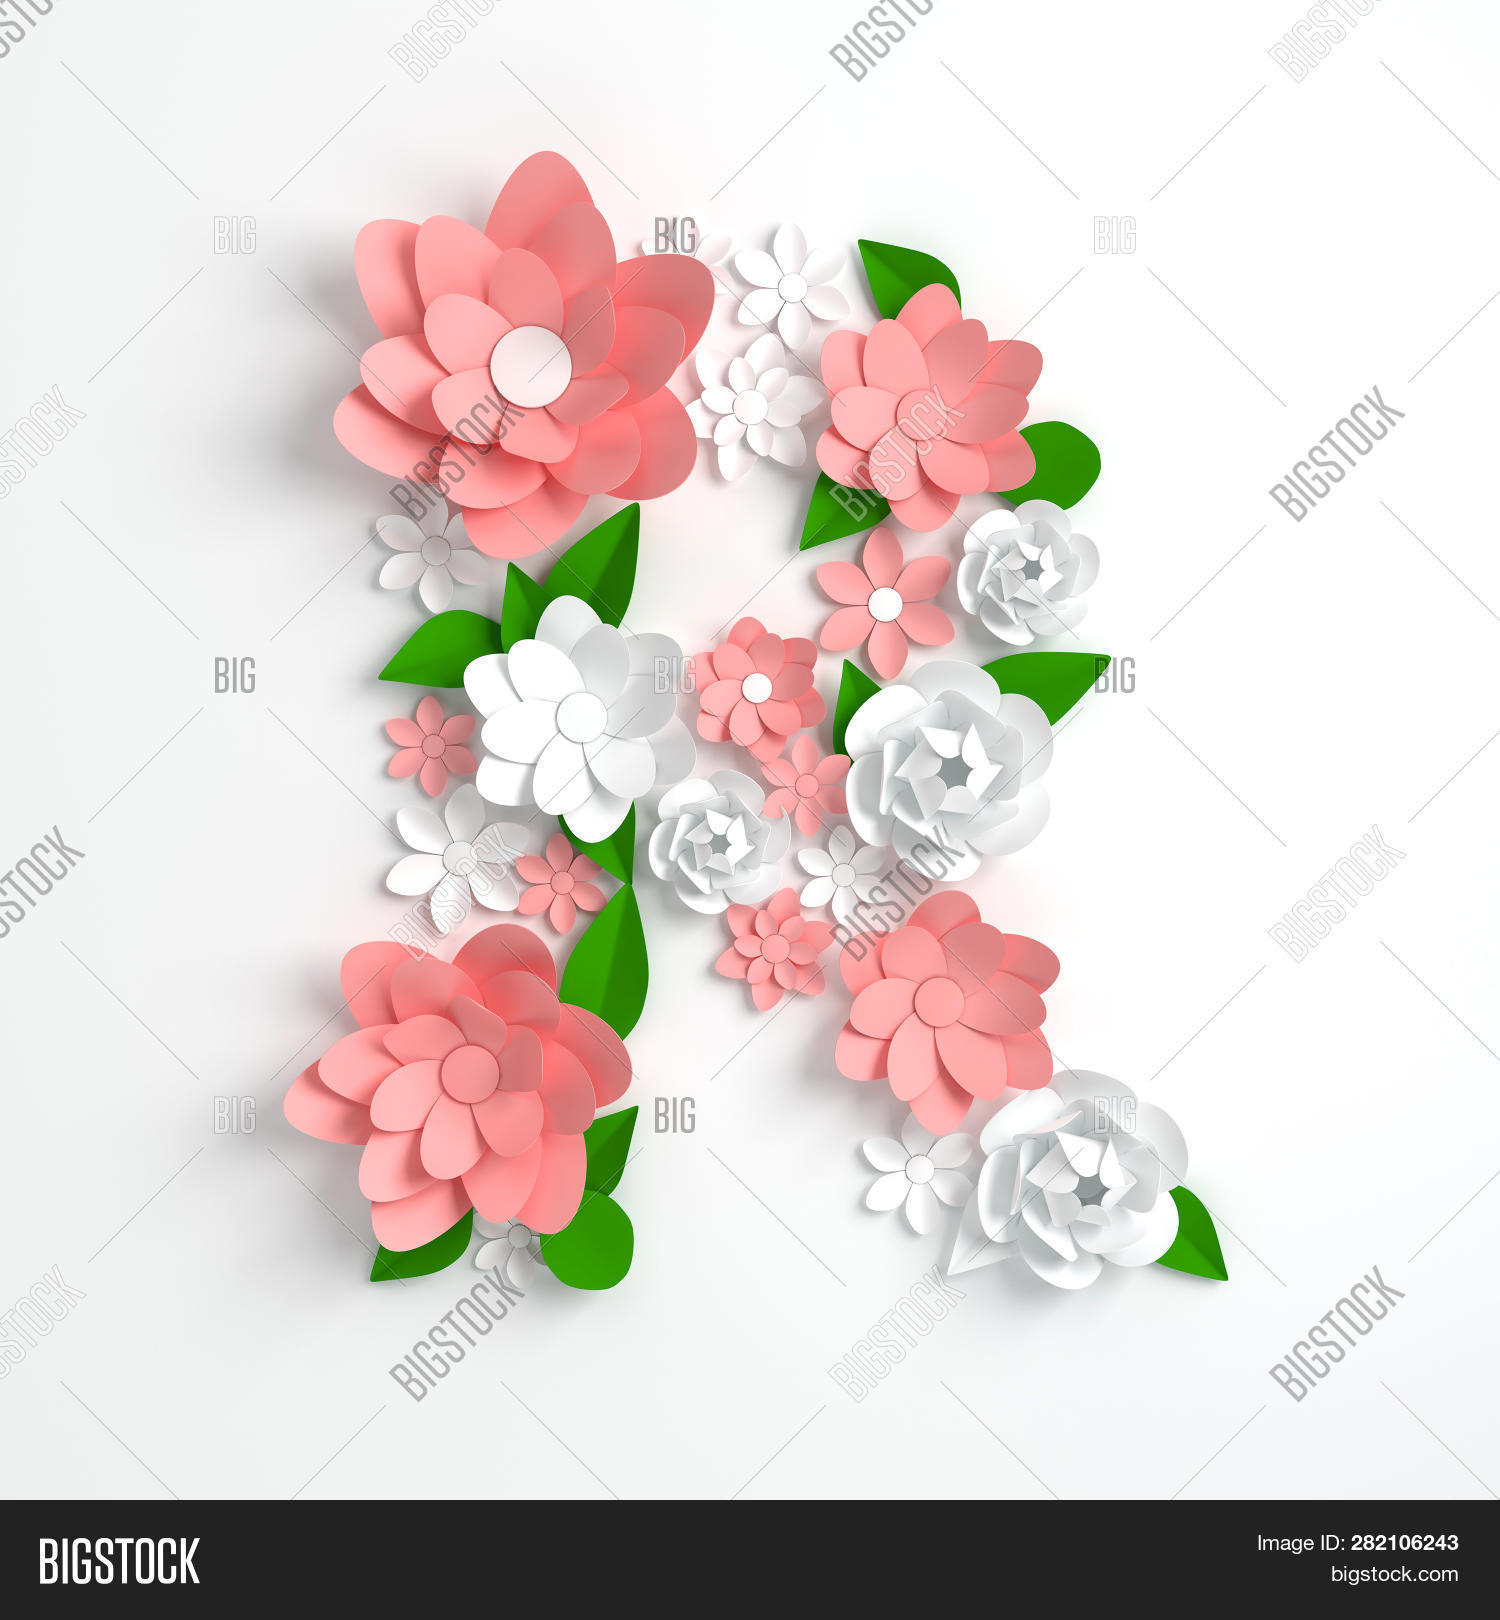 Origami Letter R Paper Flower Alphabet Image Photo Free Trial Bigstock